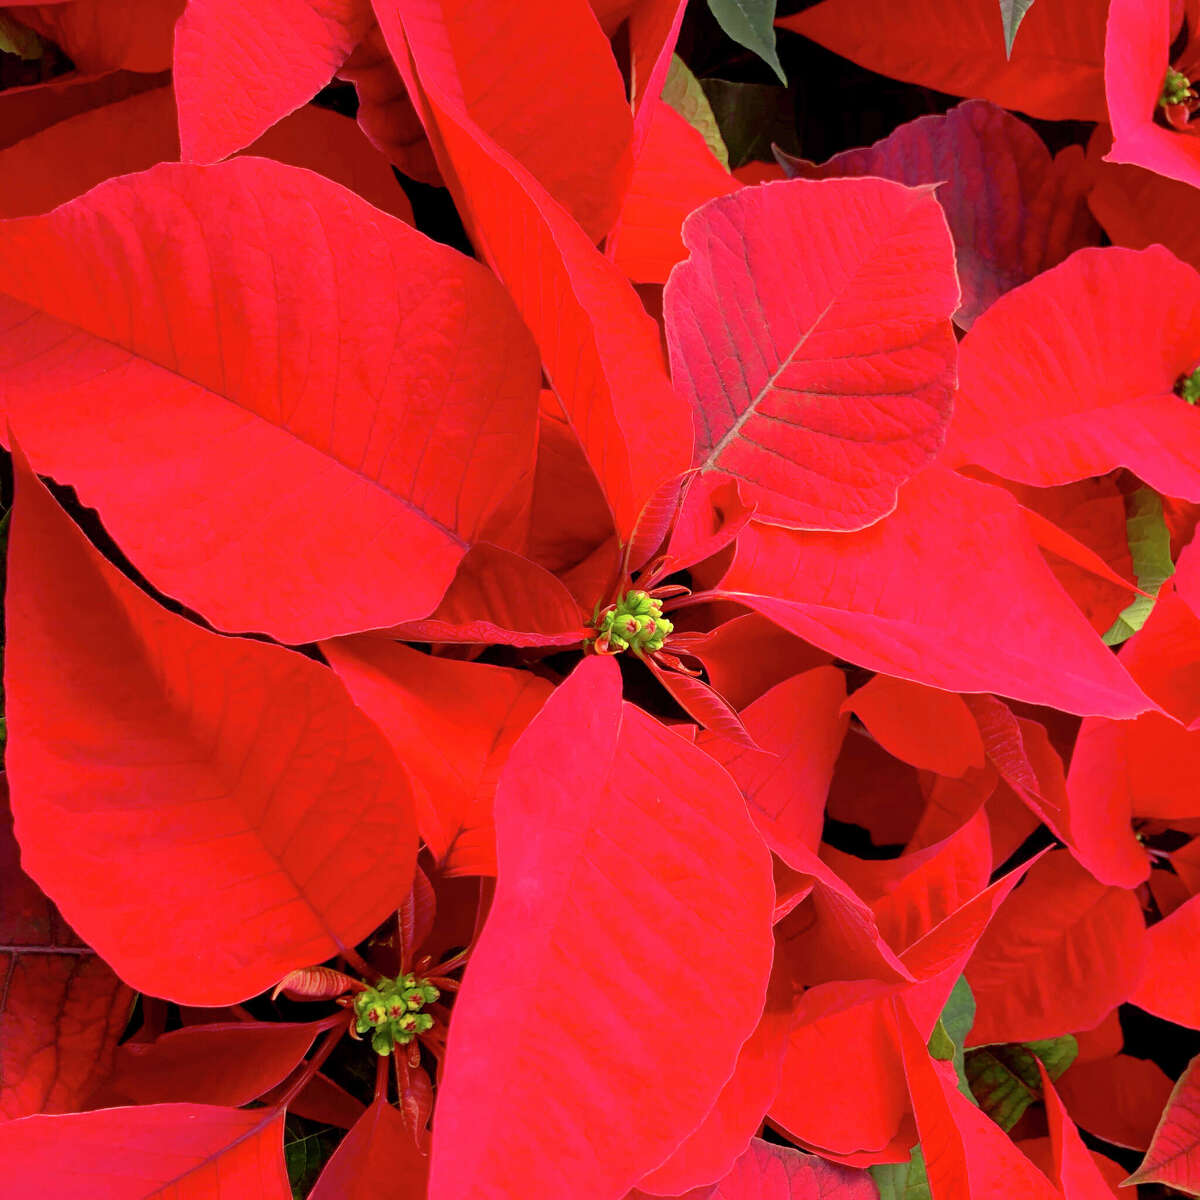 Poinsettias can be saved after the holidays if you protect them from freezing temperatures.